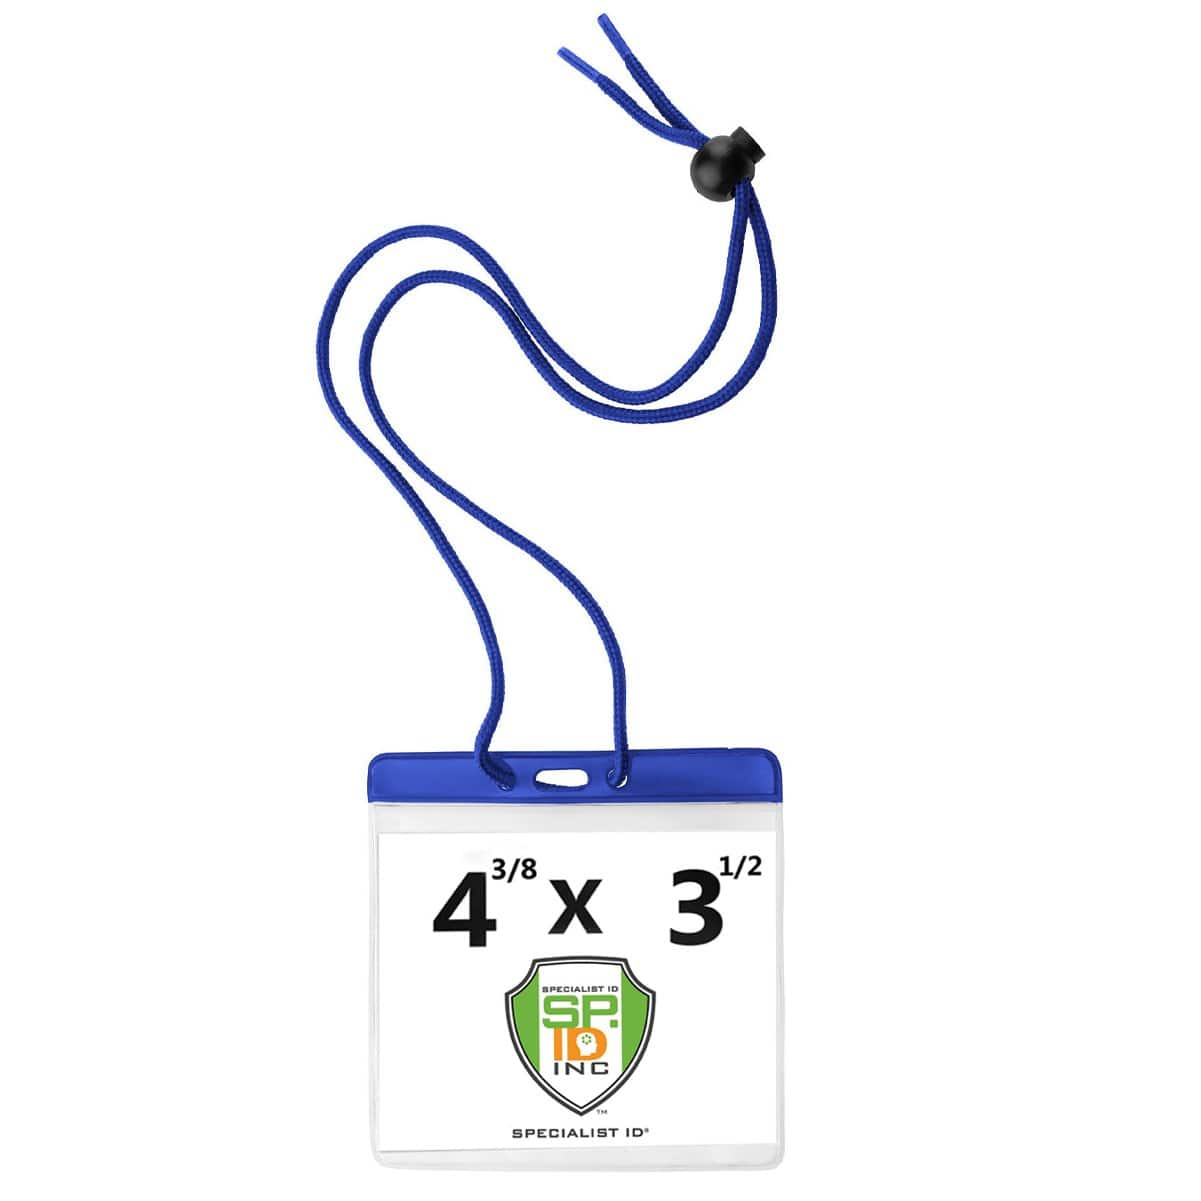 A 4x3 Inch Color Bar Event Badge with Adjustable Lanyard - Extra Large (Max Insert 4 3/8 X 3 1/2) Colored Name Badge with Matching Color Code Lanyard (1860-290X), displaying a card with dimensions 4 3/8 x 3 1/2 inches, featuring a Specialist ID Inc. logo.